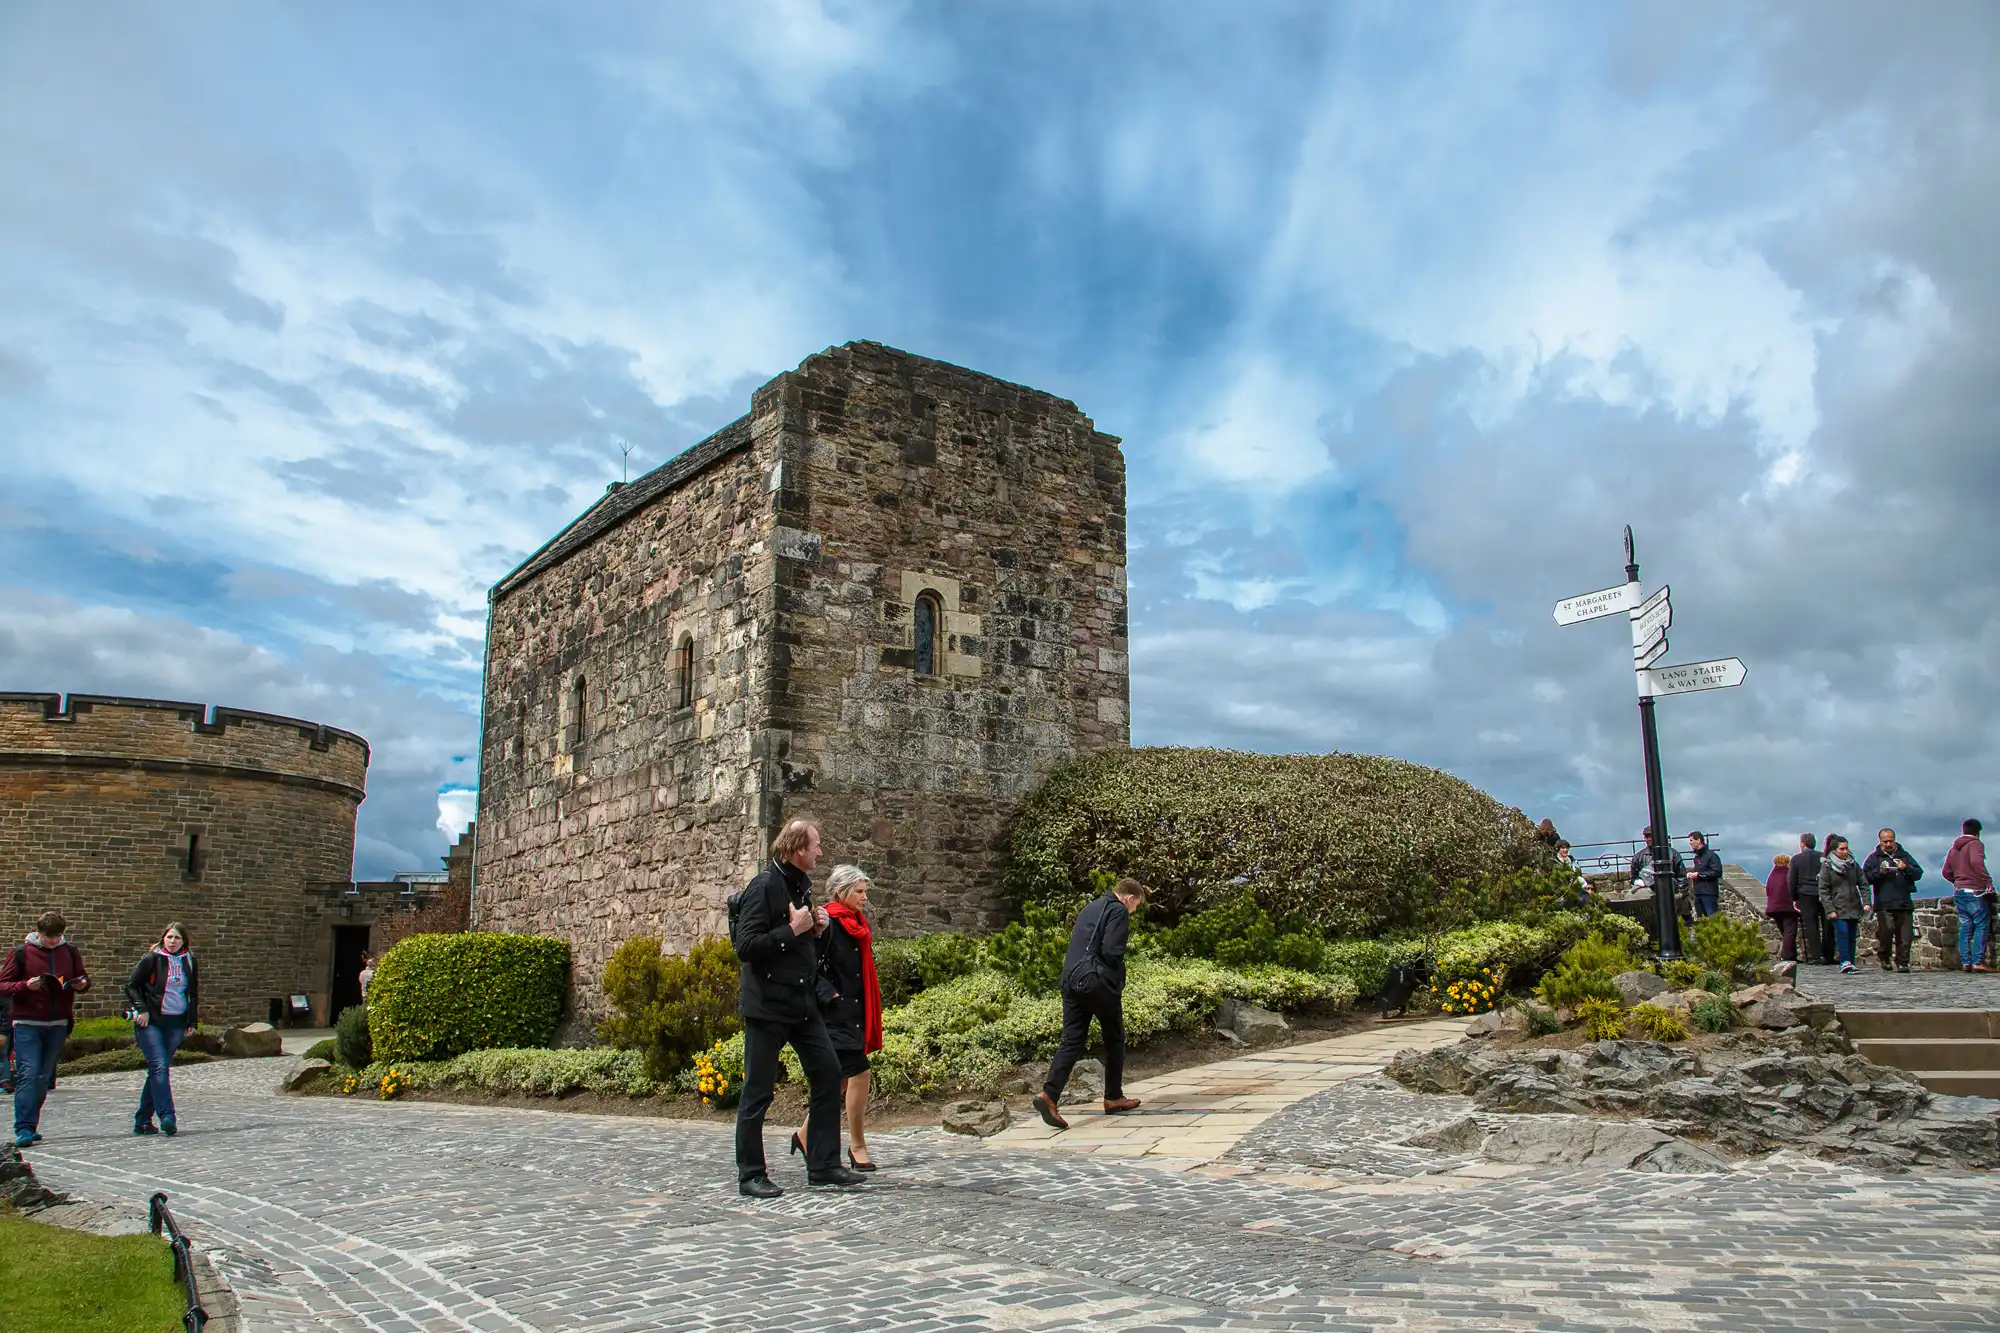 Visitors explore the grounds near an ancient stone building under a partly cloudy sky, with directional signposts and lush greenery visible.